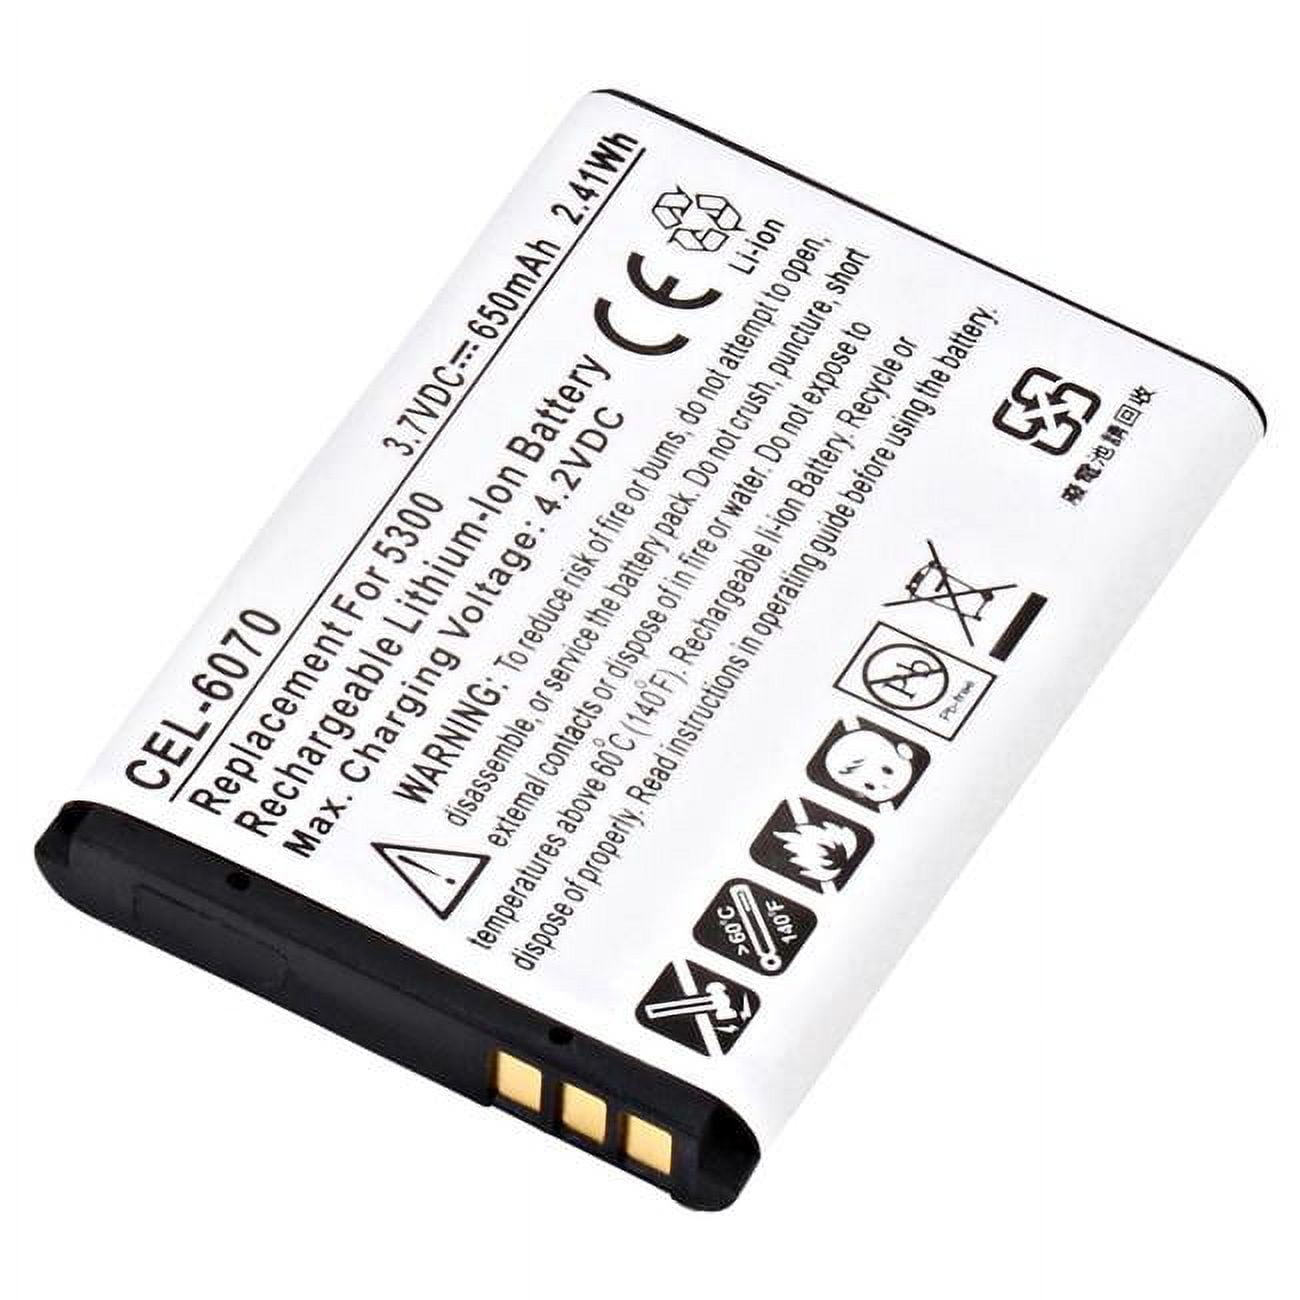 Picture of Ultralast CEL-6070 3.7V & 900 mAh Replacement Lithium-Ion Battery for Nokia 3220 Cellular Phone